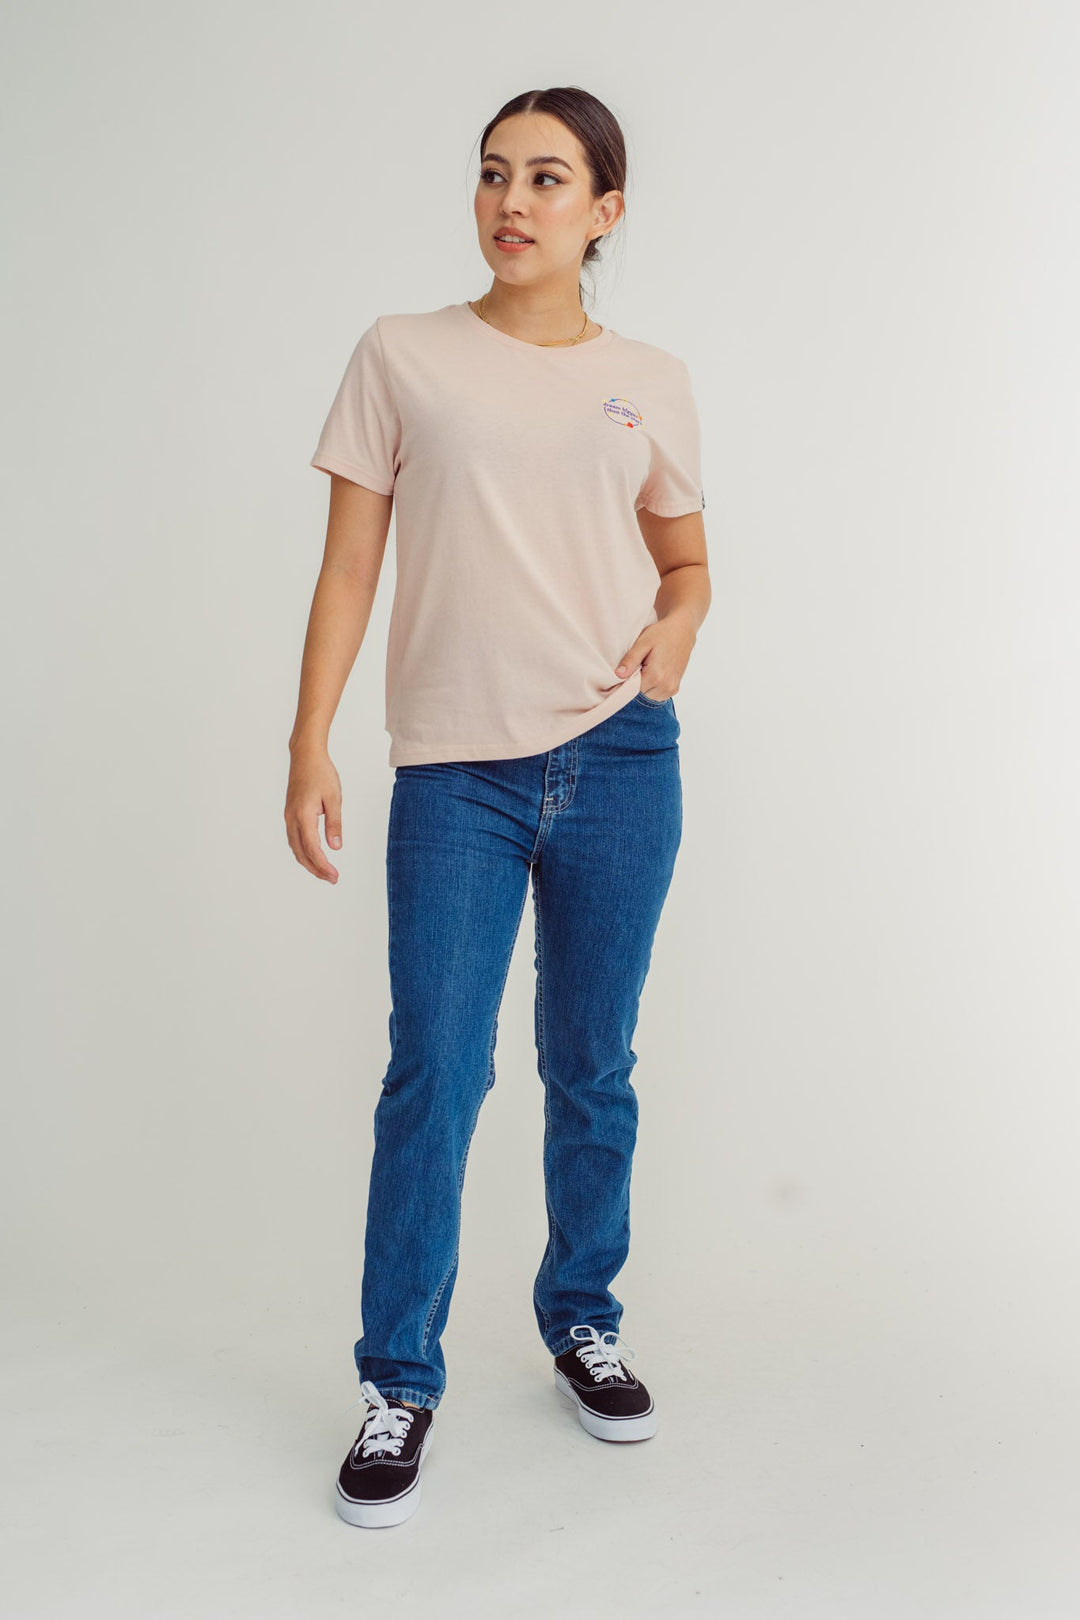 Blush Statement Tee with Embroidery Classic Fit Tee - Mossimo PH